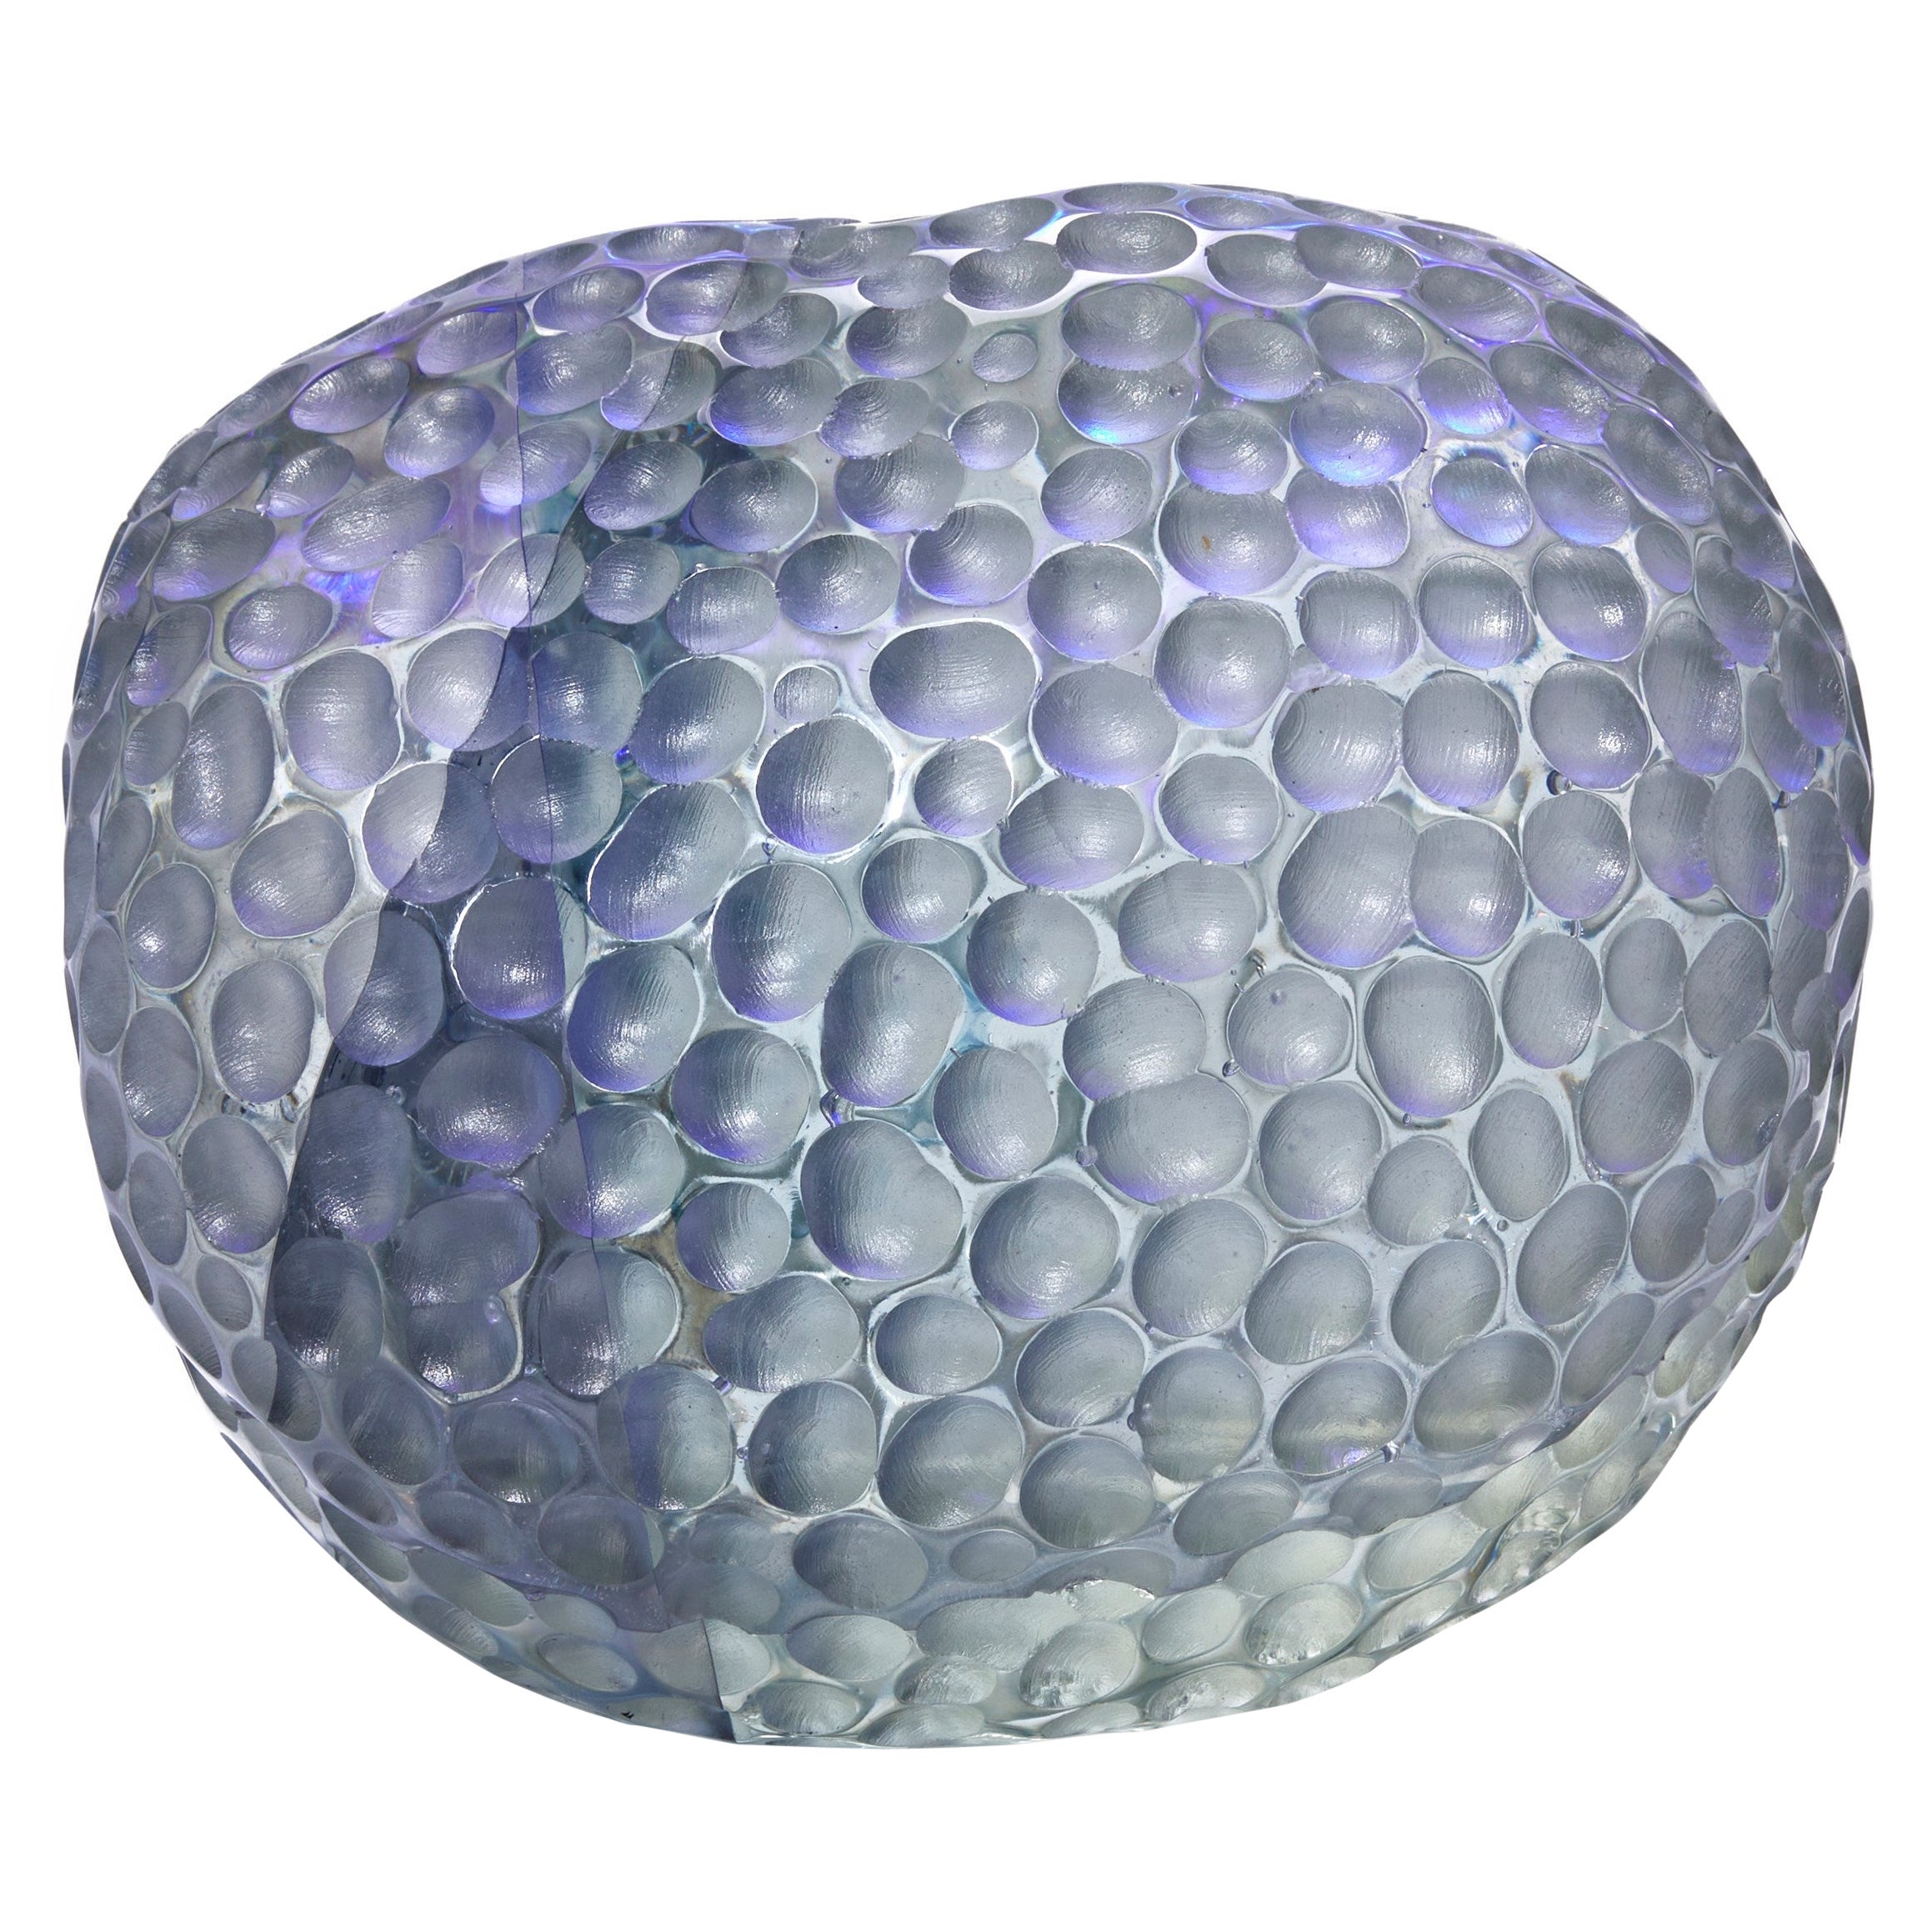 Violet Moon Rock, a Clear, Grey & Purple Textured Glass Sculpture by Jon Lewis